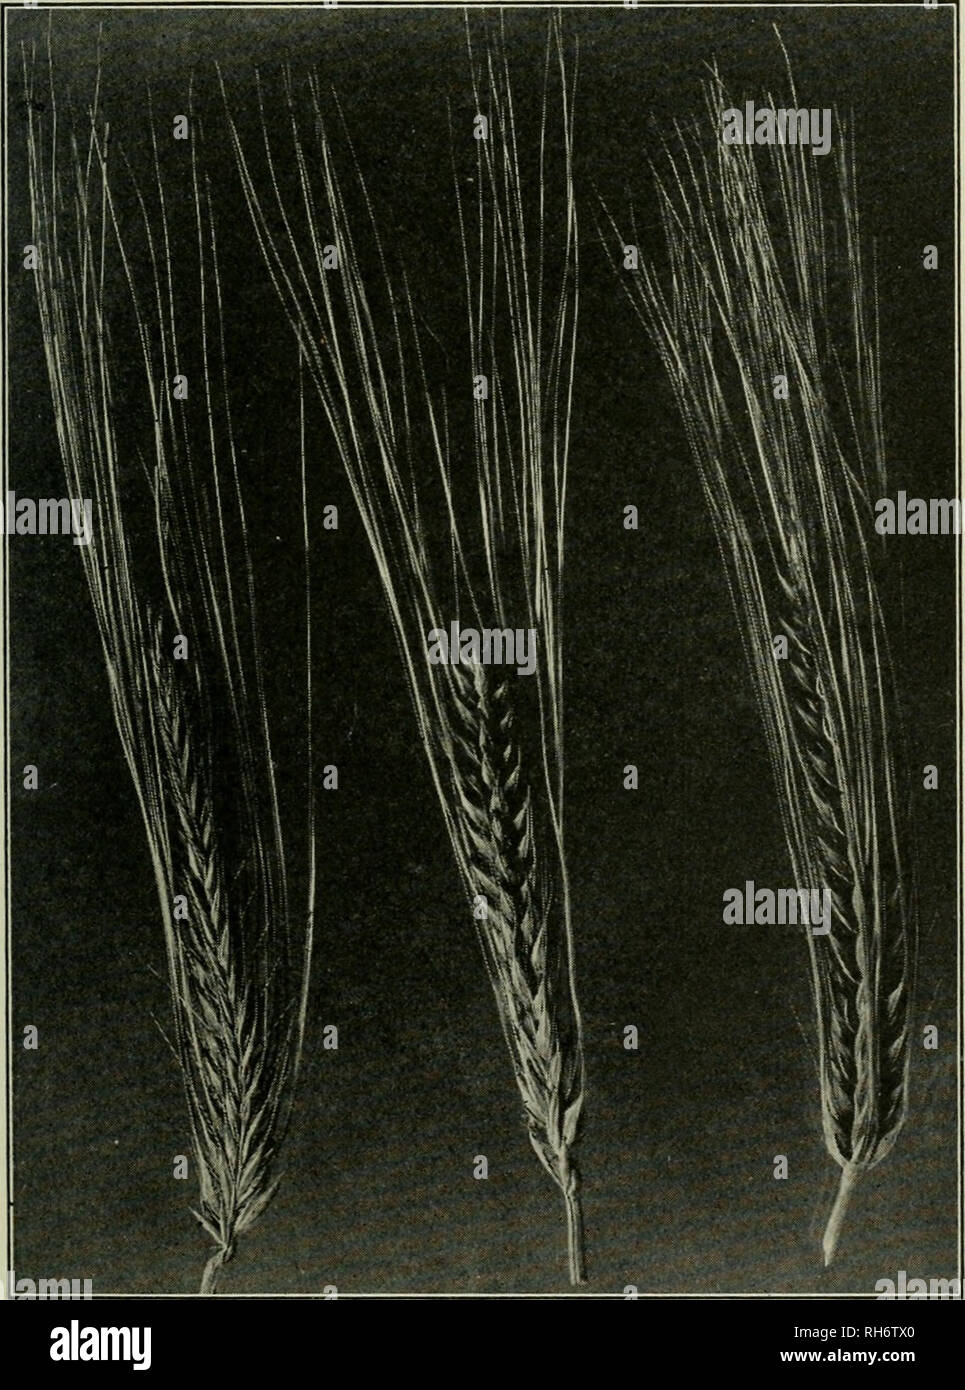 . Breeding crop plants. Plant breeding. CLASSIFICATION AND INHERITANCE OF SMALL GRAINS 101 with very low fruitfulness in Fi and a ratio indicating one main factor difference in F2.. Fig. 24.—-Individual spikes of Ft generation of cross of Svanhals X Manchuria representing the phenotypic progeny classes in which lateral florets bear awns. From left to right: Low fertility awned plant which will give all classes of segregates in F3 as in F2; high fertility awned which will segregate into inter- jnedium, high fertility awned and six-rowed in F3; six-rowed which will breed true in F3. (After Harla Stock Photo